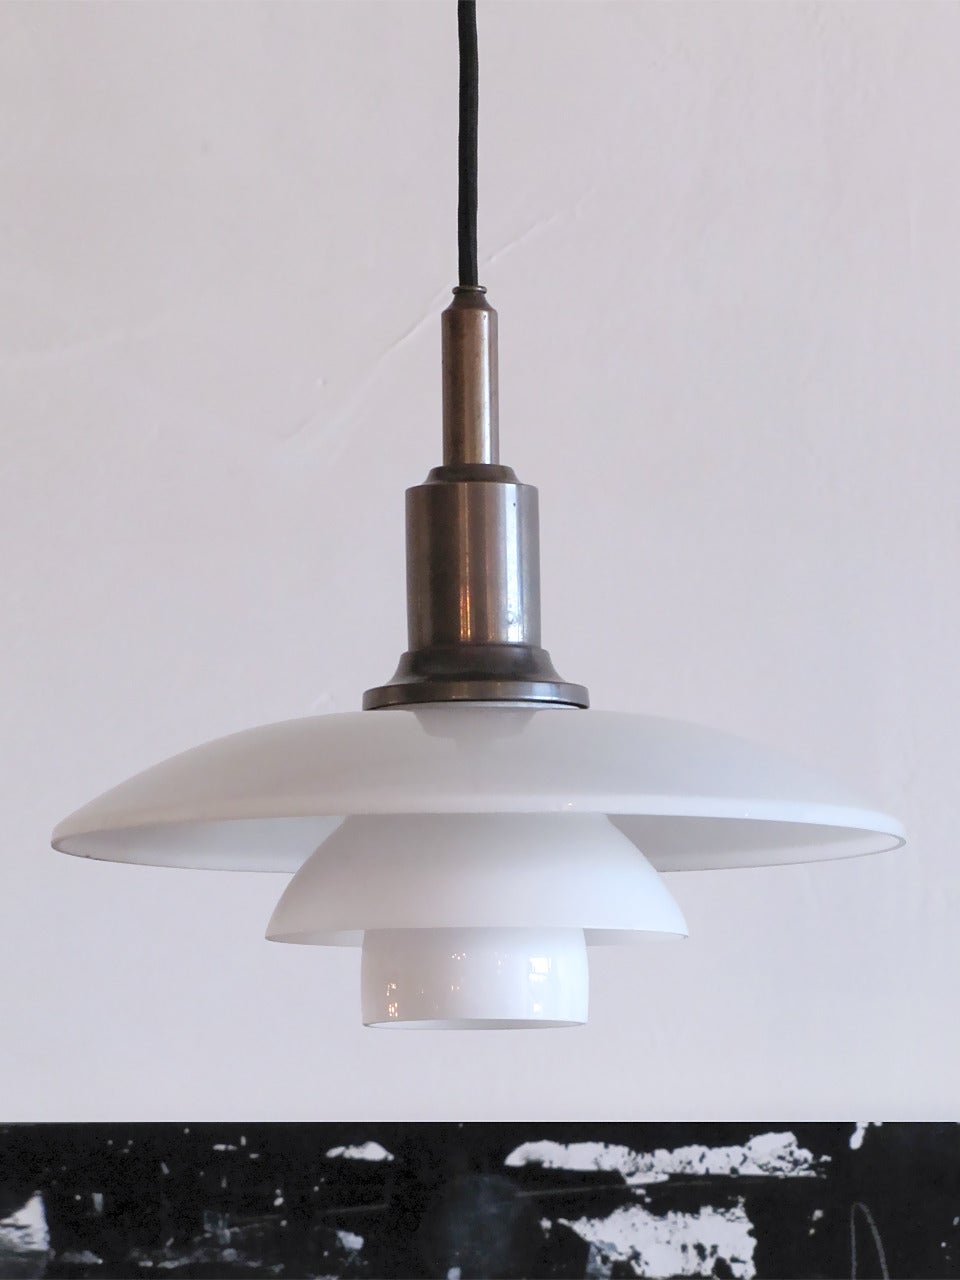 Rare limited edition PH 3/2 pendant lamp by Poul Henningsen for Louis Poulsen, the lamp was developed in 1925-26 for the 